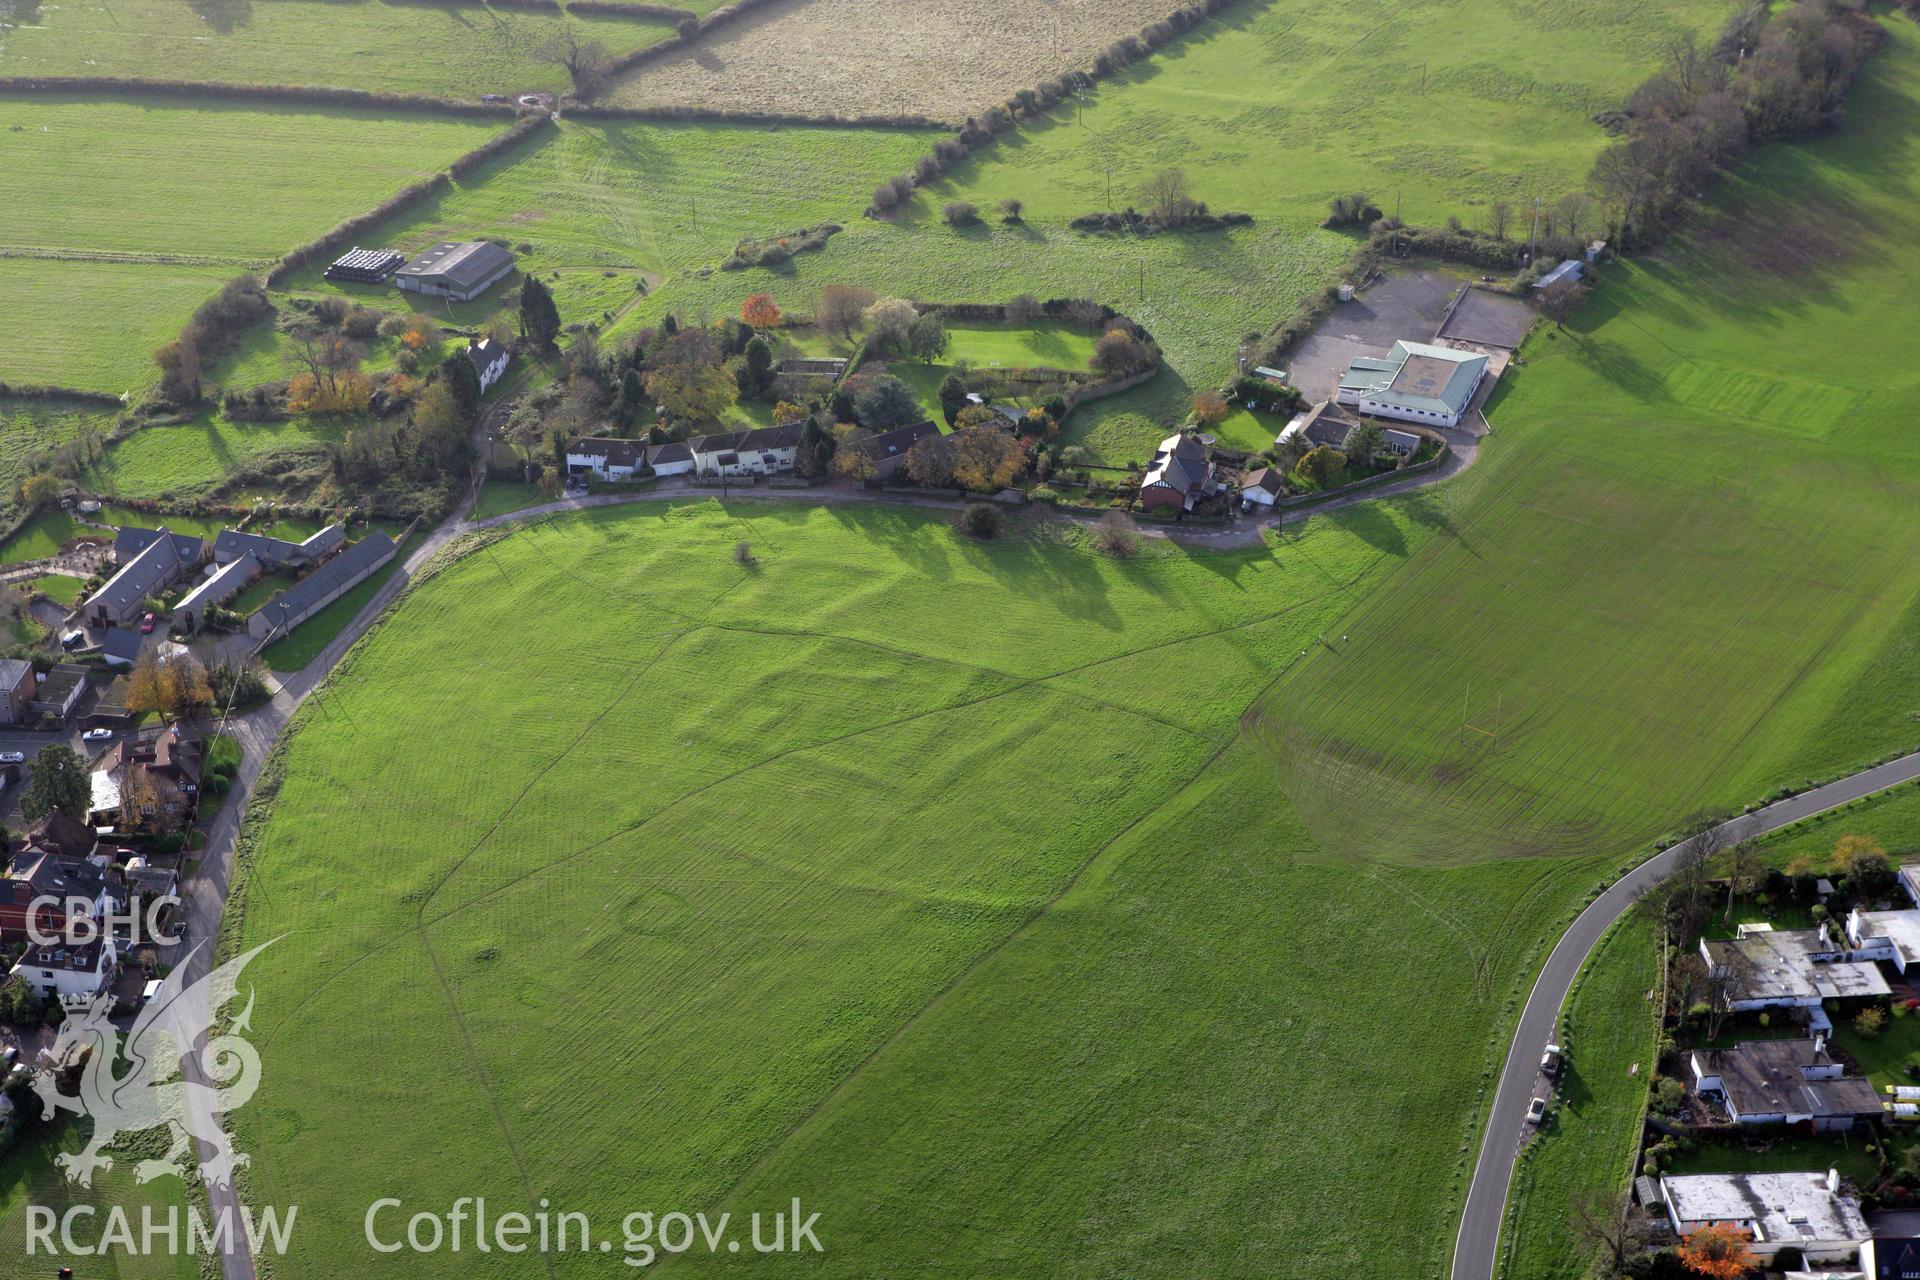 RCAHMW colour oblique photograph of Romano-British Farmstead, settlement earthworks, Dinas Powy Common. Taken by Toby Driver on 12/11/2008.